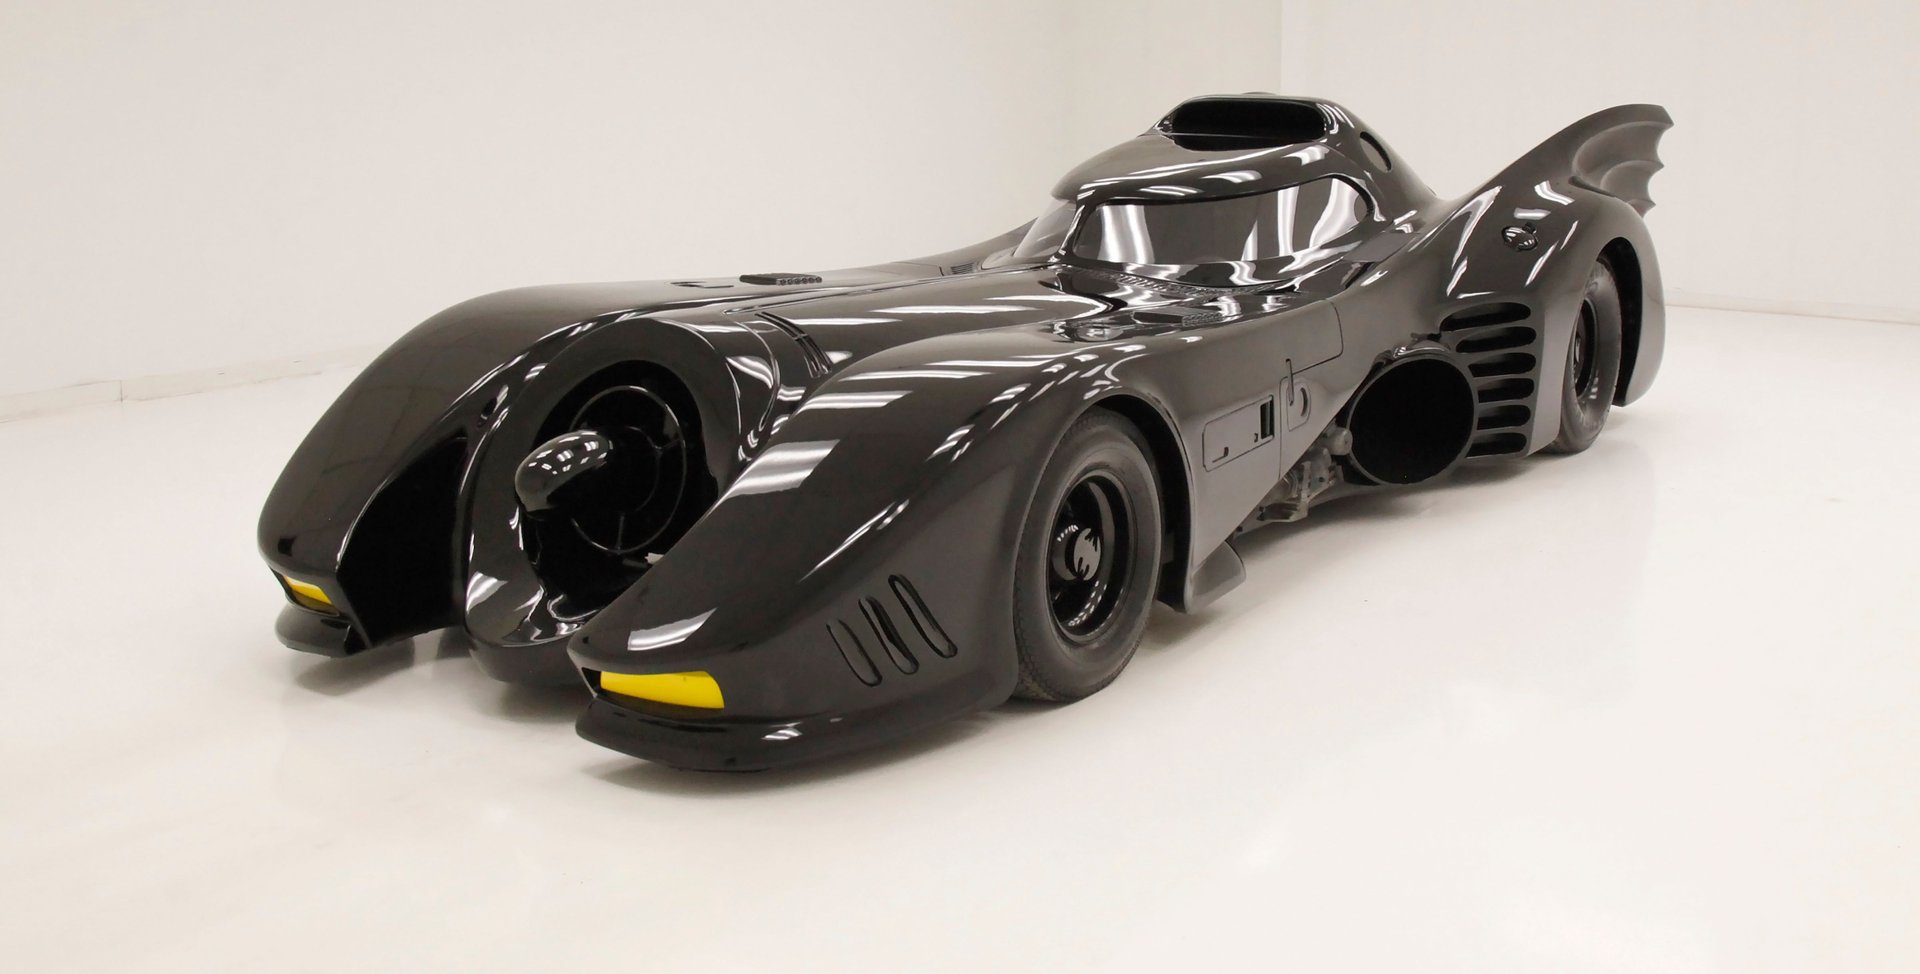 This 1989 Batmobile for sale is a genuine movie prop, but it’s not cheap Auto Recent